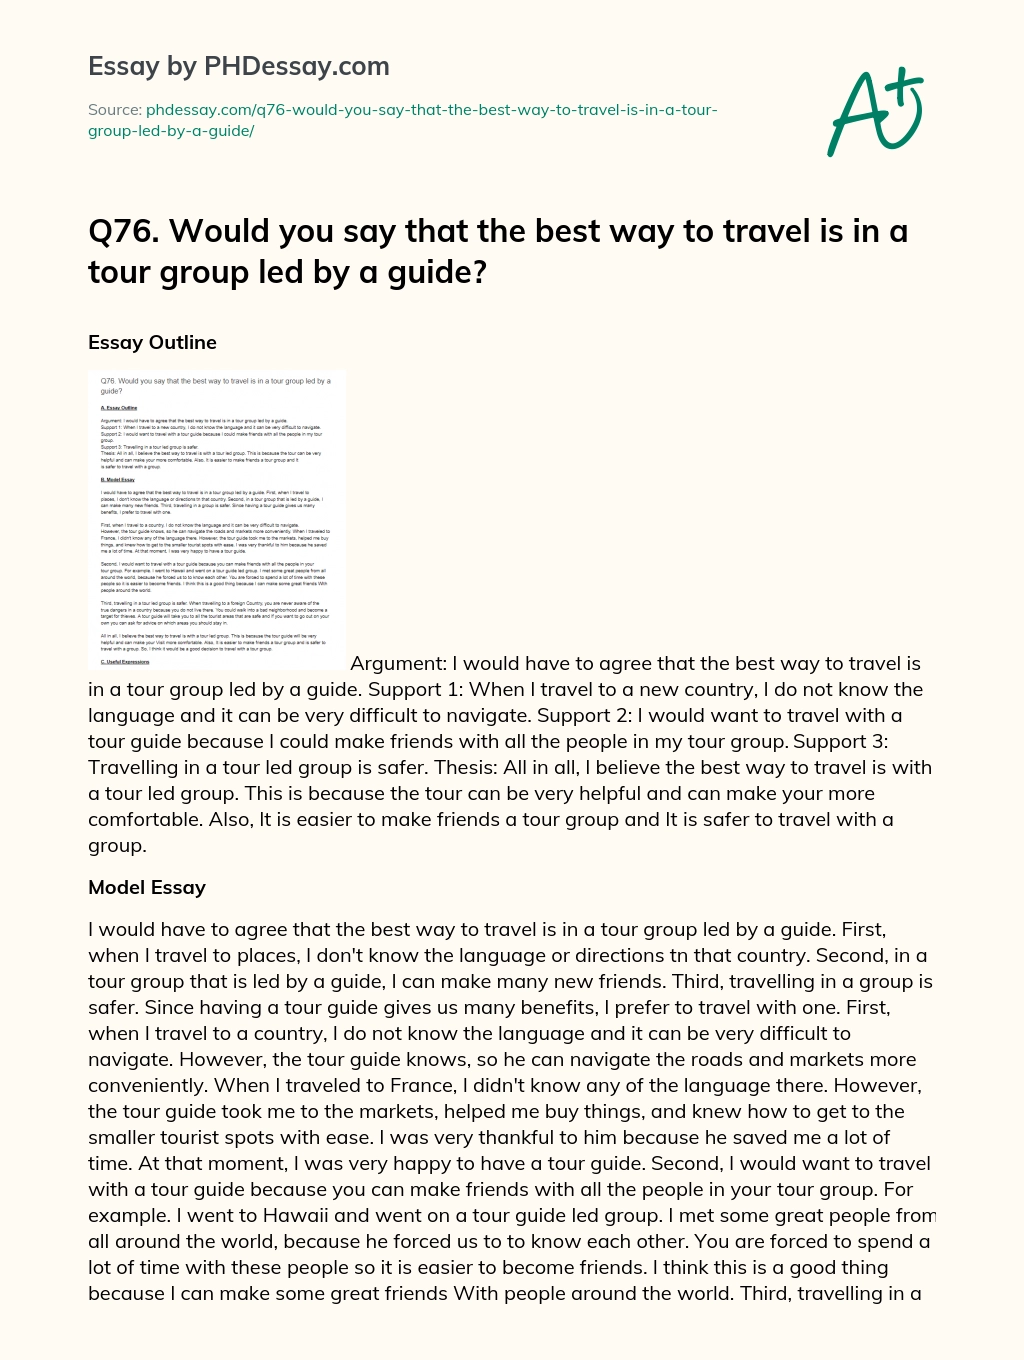 Q76. Would you say that the best way to travel is in a tour group led by a guide? essay